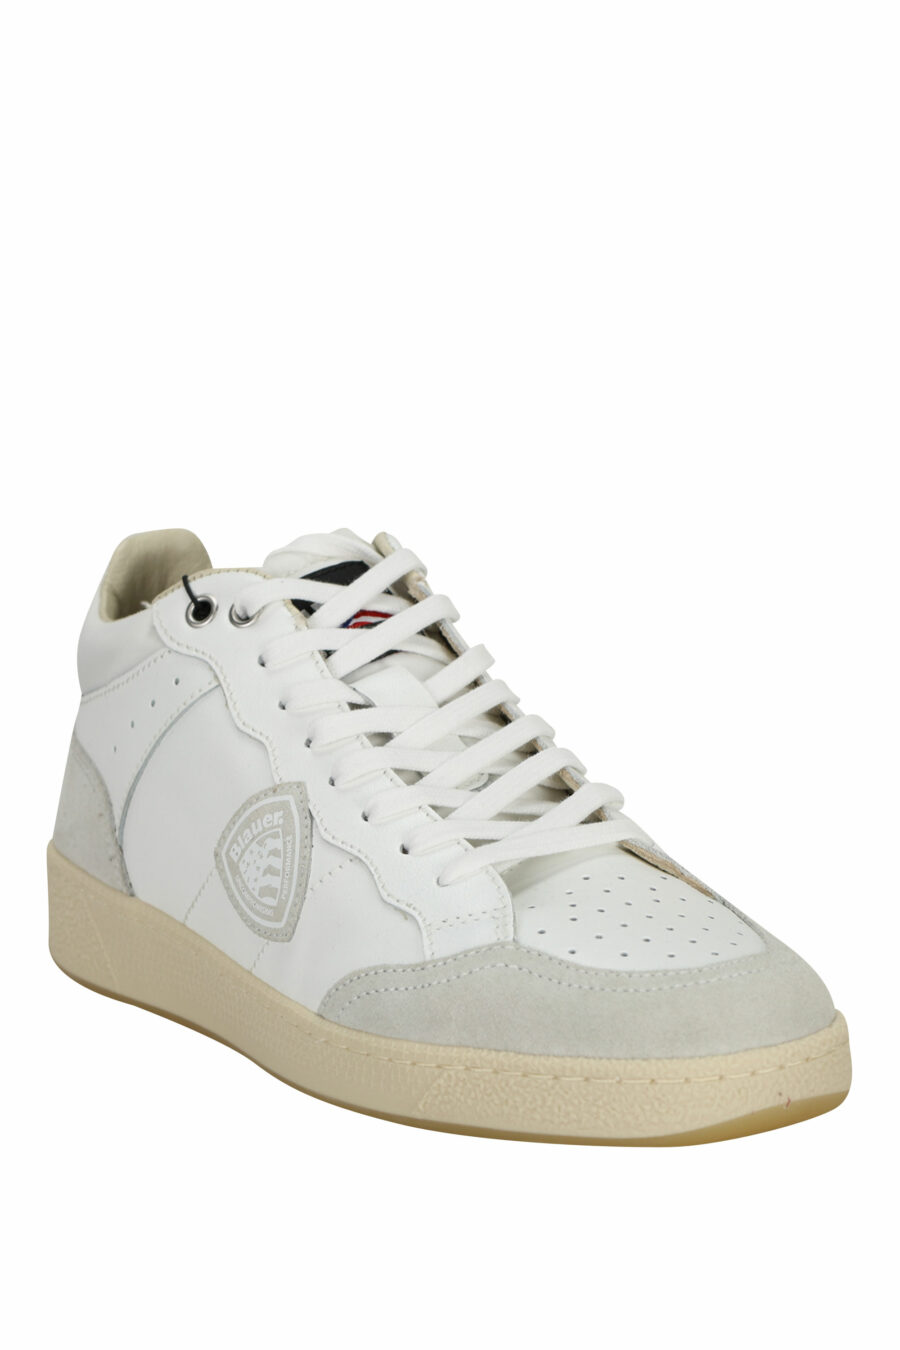 White half-tight trainers with grey "murray" - 8058156546882 1